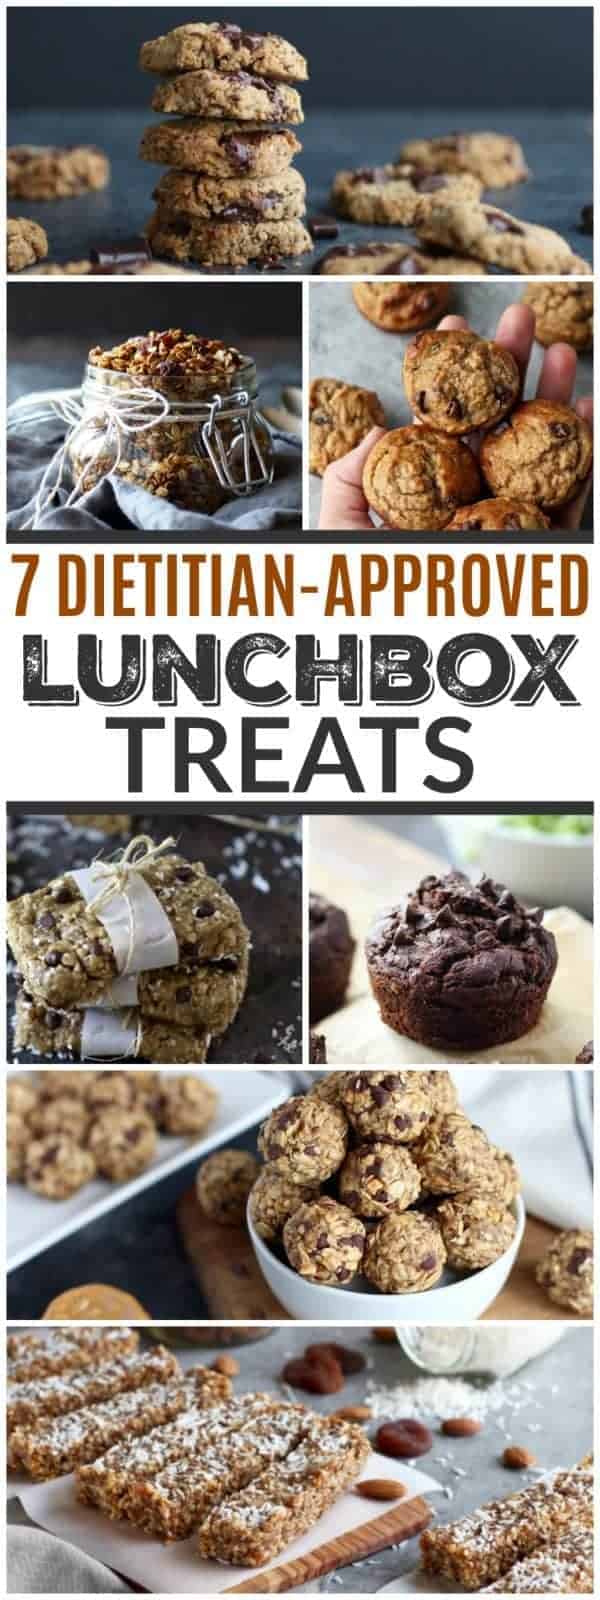 Pinterest image for 7 Dietitian-Approved Lunchbox Treats